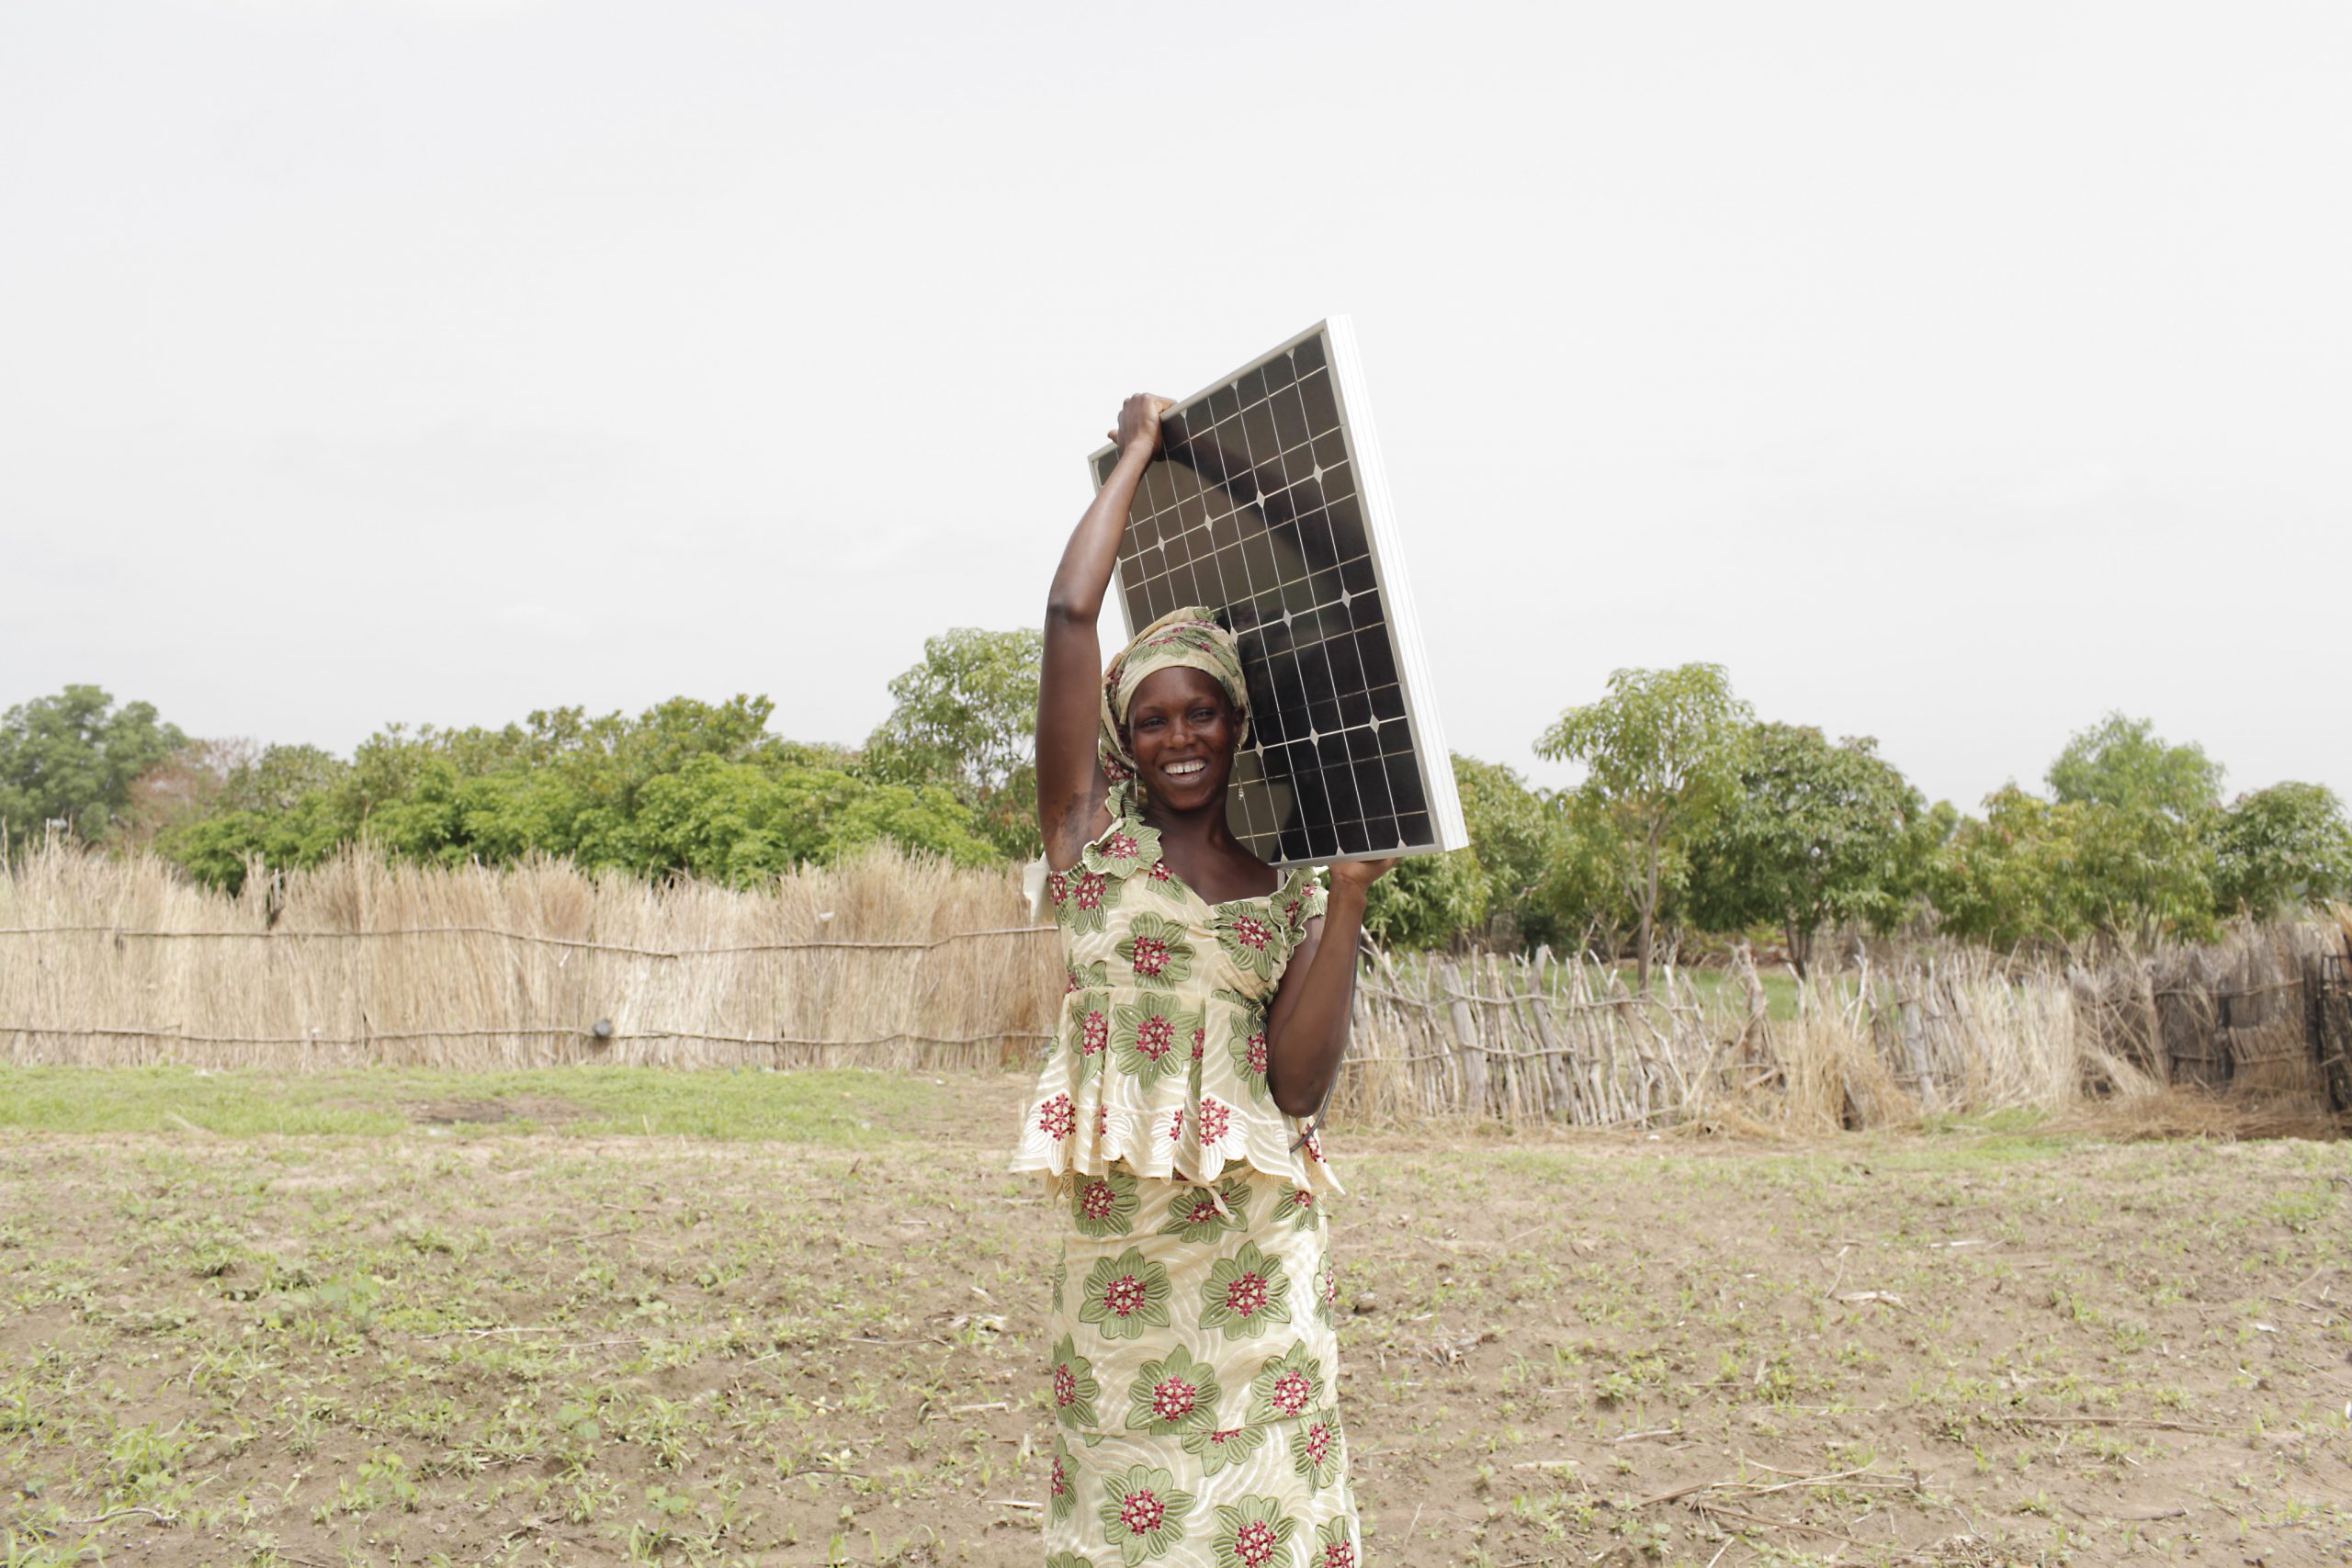 Event: Harnessing the power of gender data to transform the clean energy workforce